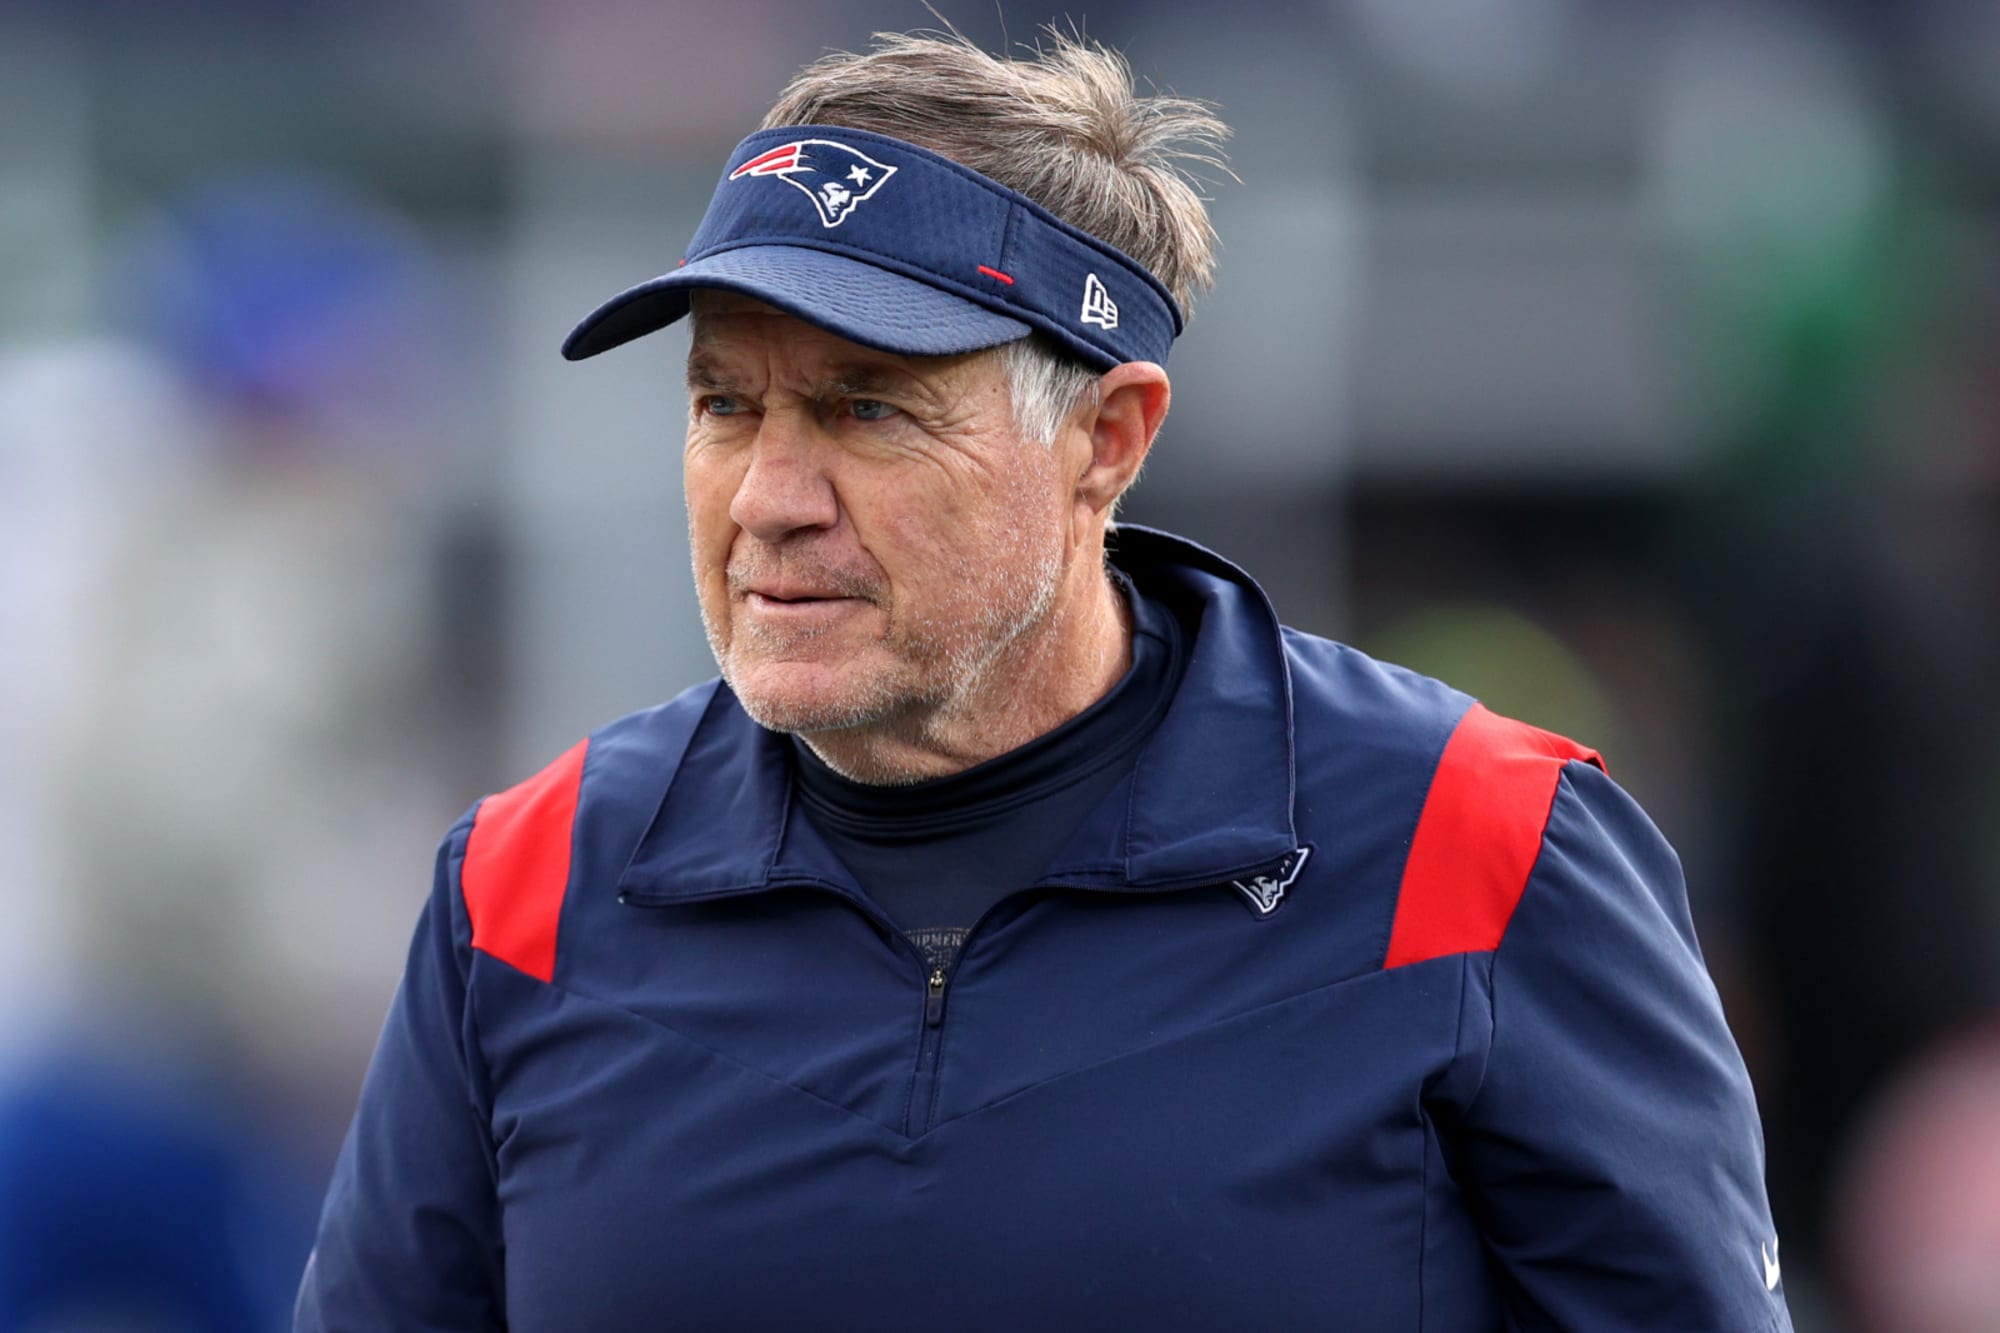 Understanding The Legacy Of Bill Belichick: A Look At The Legendary NFL Coach